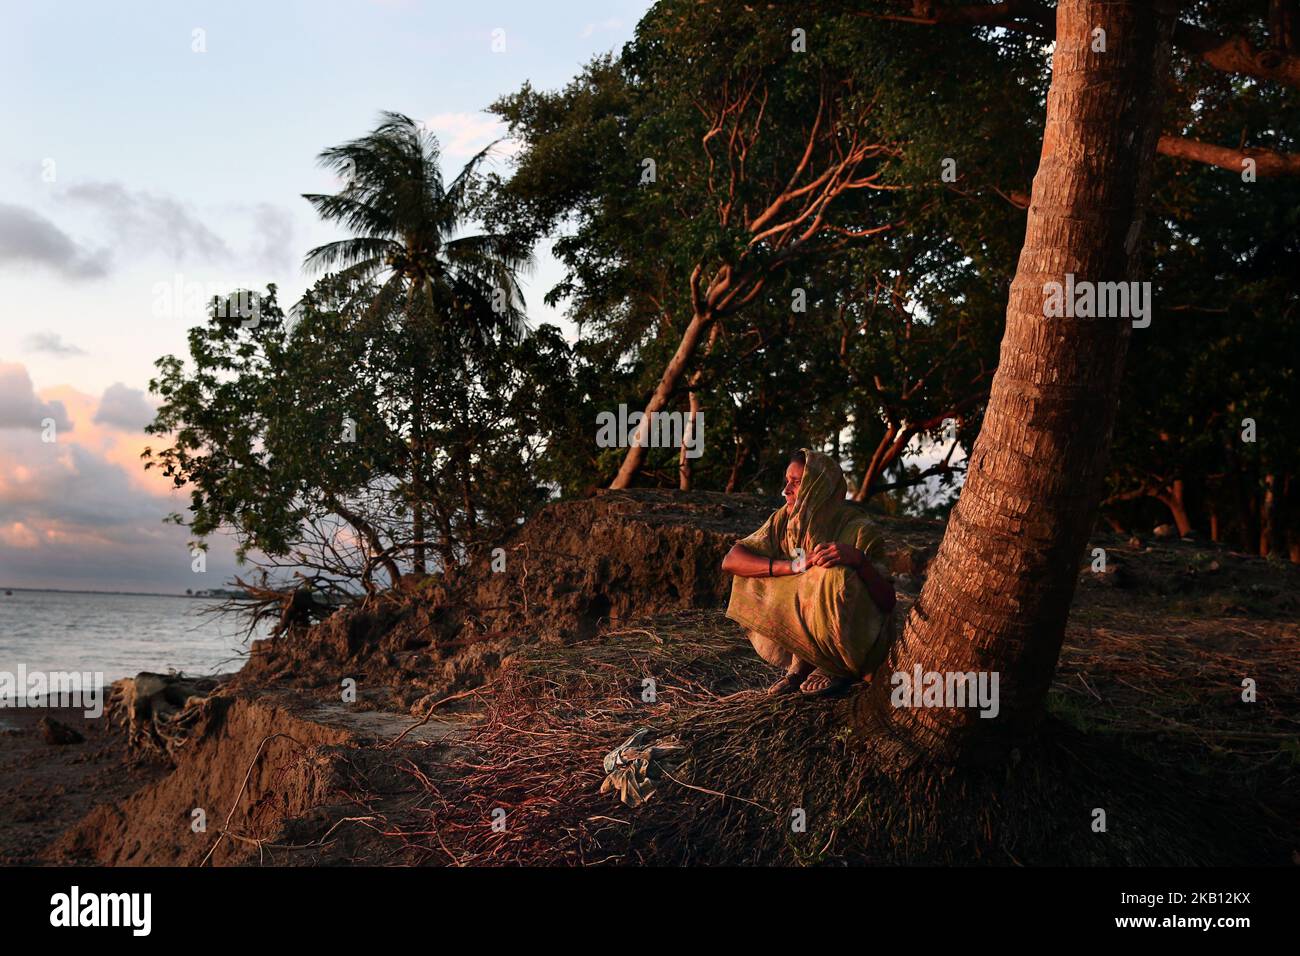 Tulu rani (85) sits near the bank of the river where she has lost her land to river erosion in Monpura Island, Bhola, Bangladesh, on September 5, 2018. The Bhola is a southern part district of Bangladesh, a country which is ranked as one of the worlds most vulnerable countries to climate change. The southern part of Bangladesh is known to be especially vulnerable. The Bhola district is no exception. Situated where freshwater from the rivers meets saltwater from the Bay of Bengal, the district is exposed both to the activity of two rivers, as well as to tidal changes and cyclones from the ocean Stock Photo